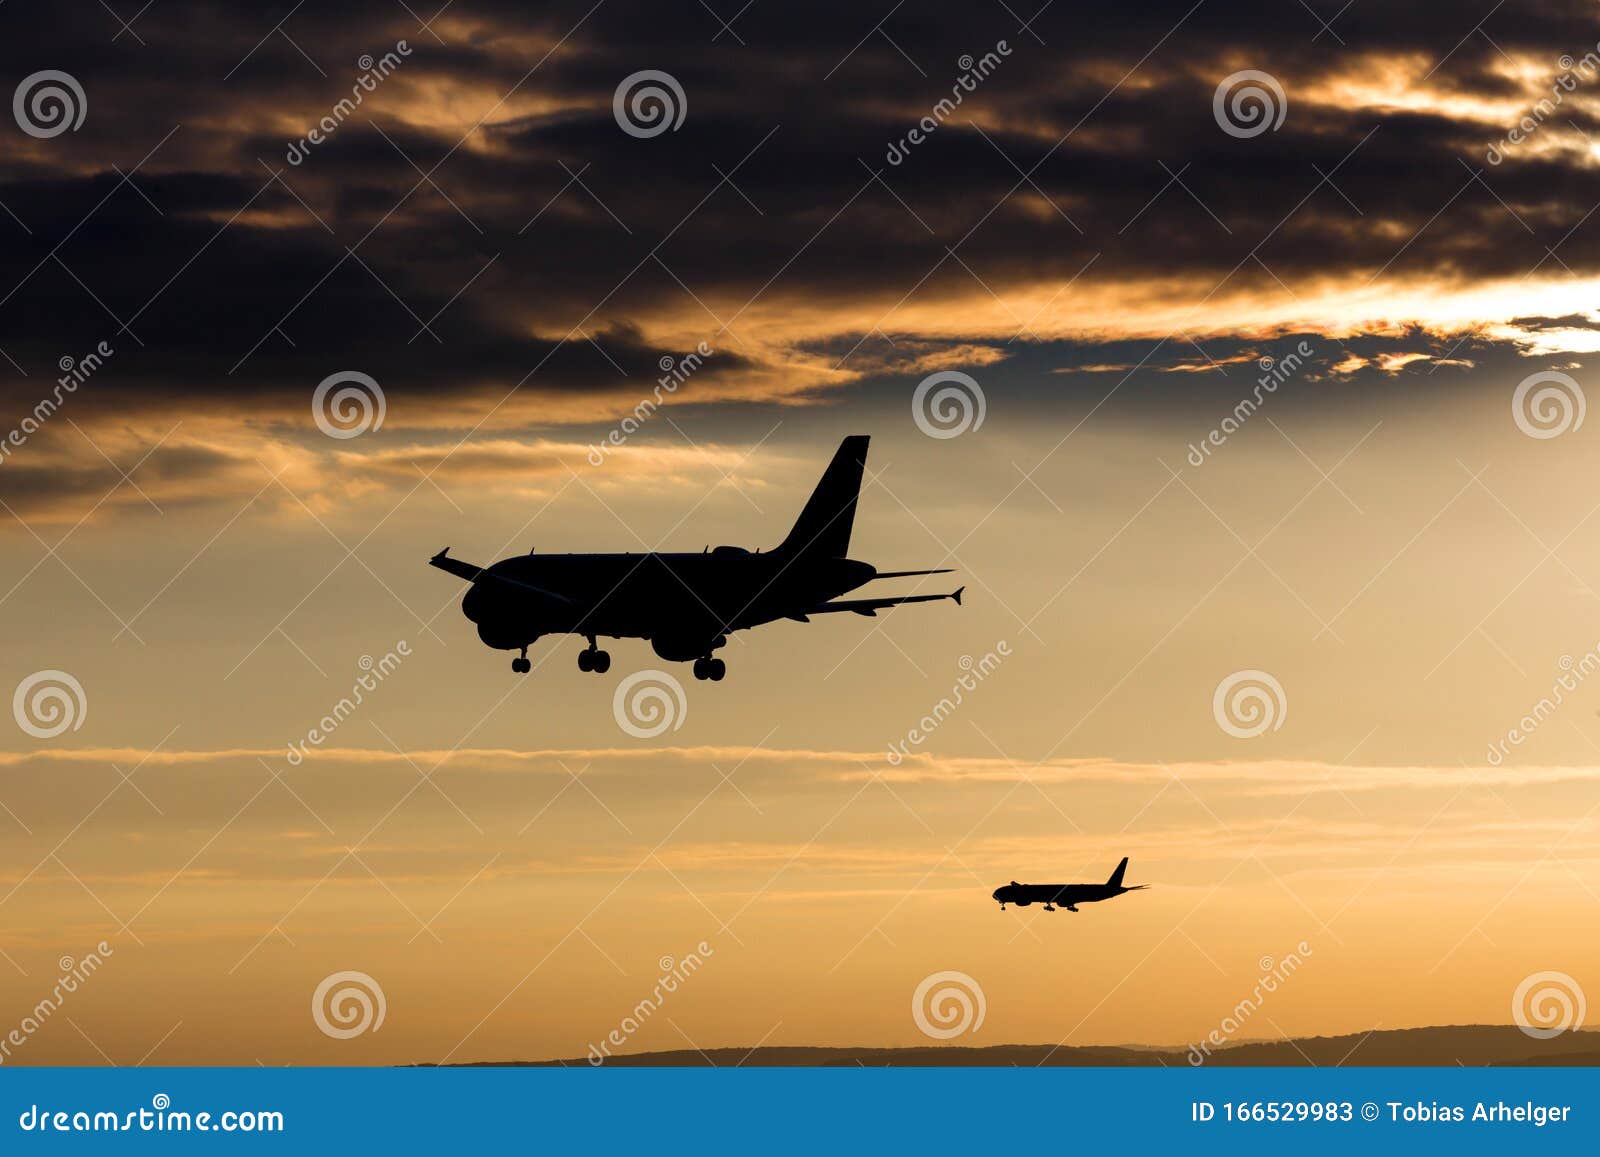 passenger airplanes landing in the evening sun